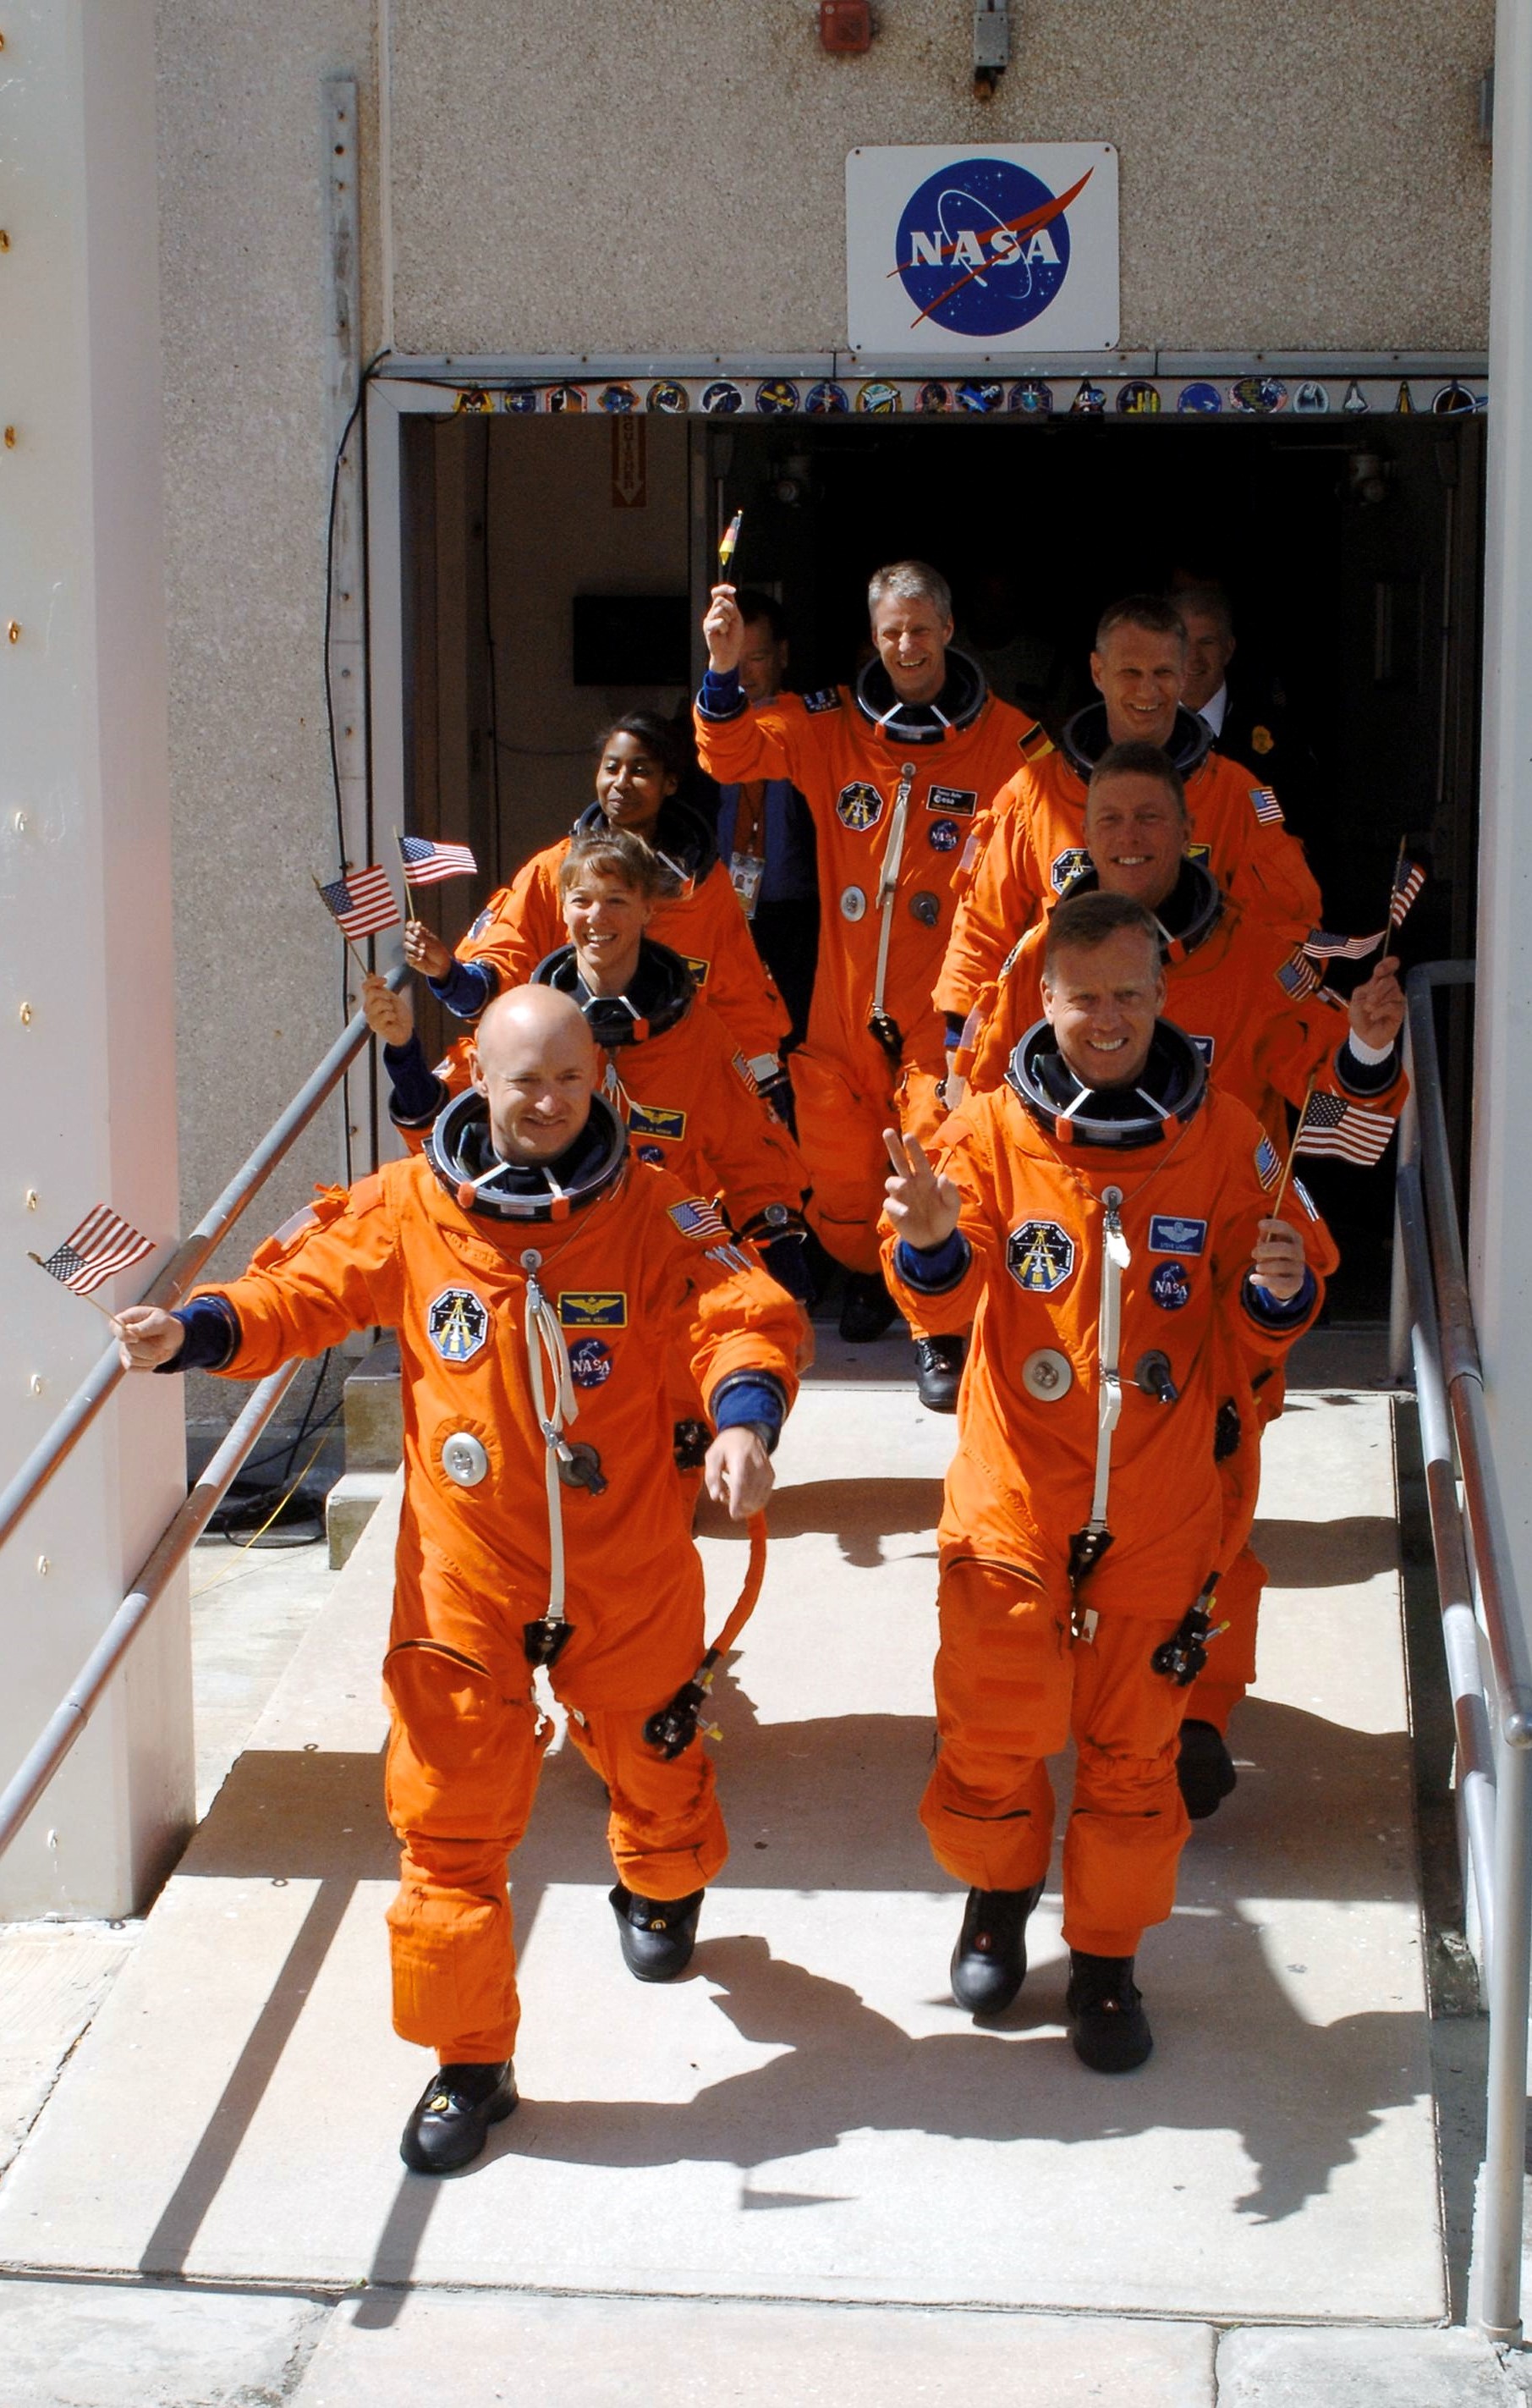 July 4, 2006. The crew of STS-121 wave American (and one German) flags as they depart crew quarters for their Fourth of July launch